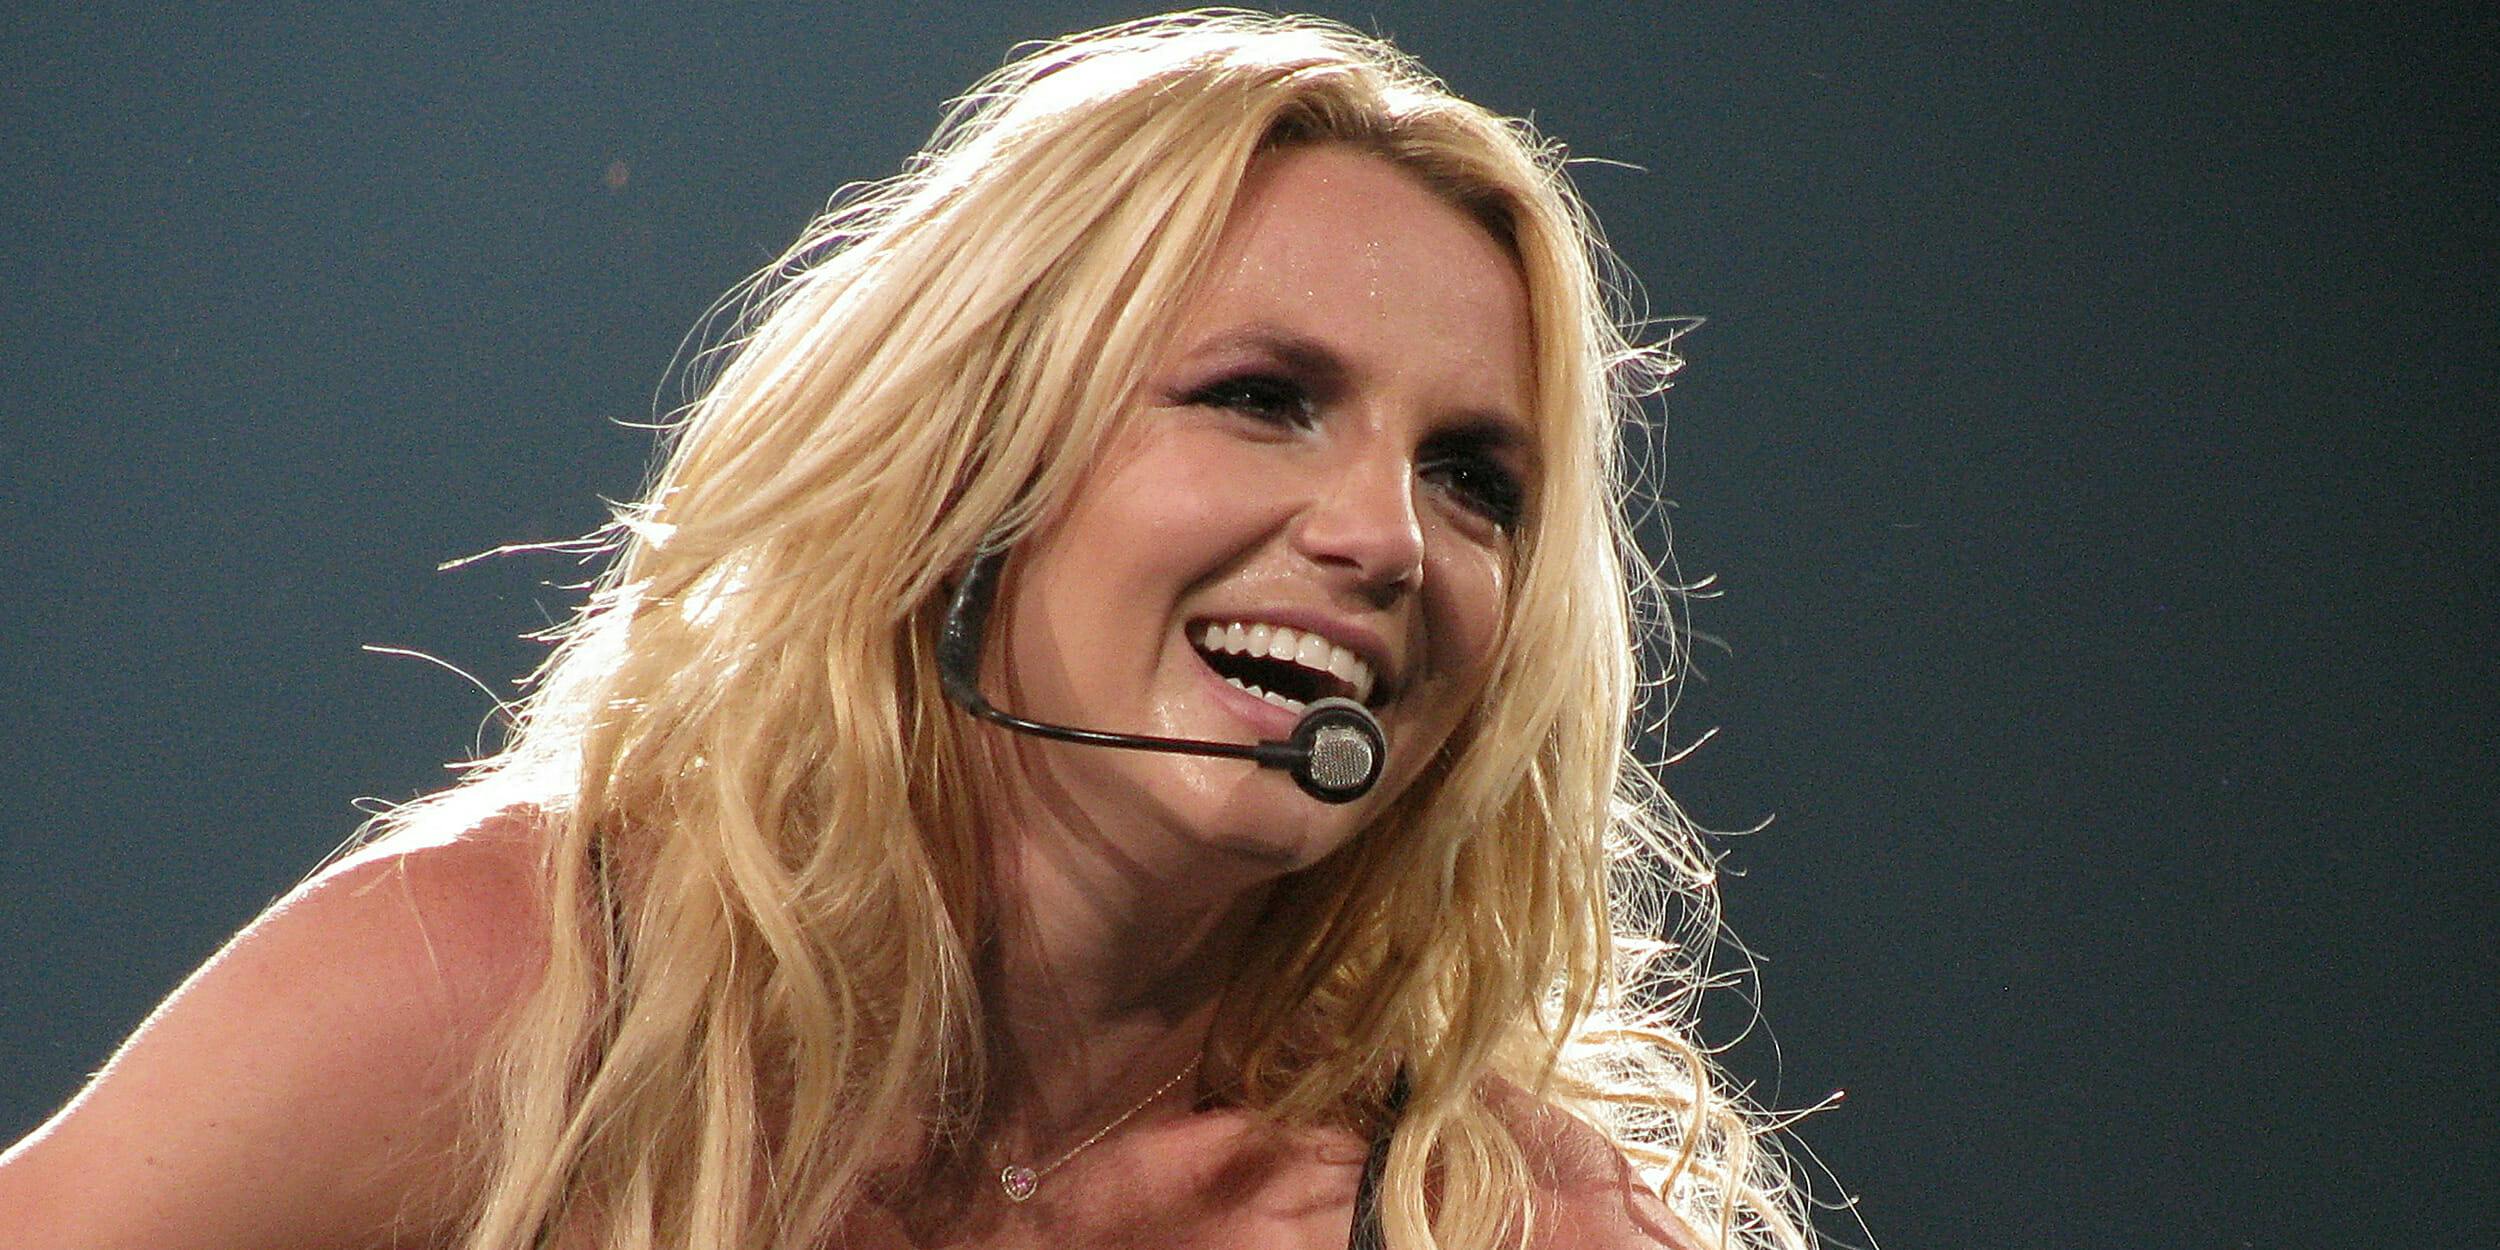 People Are Making Memes About Britney Spears Being a Socialist